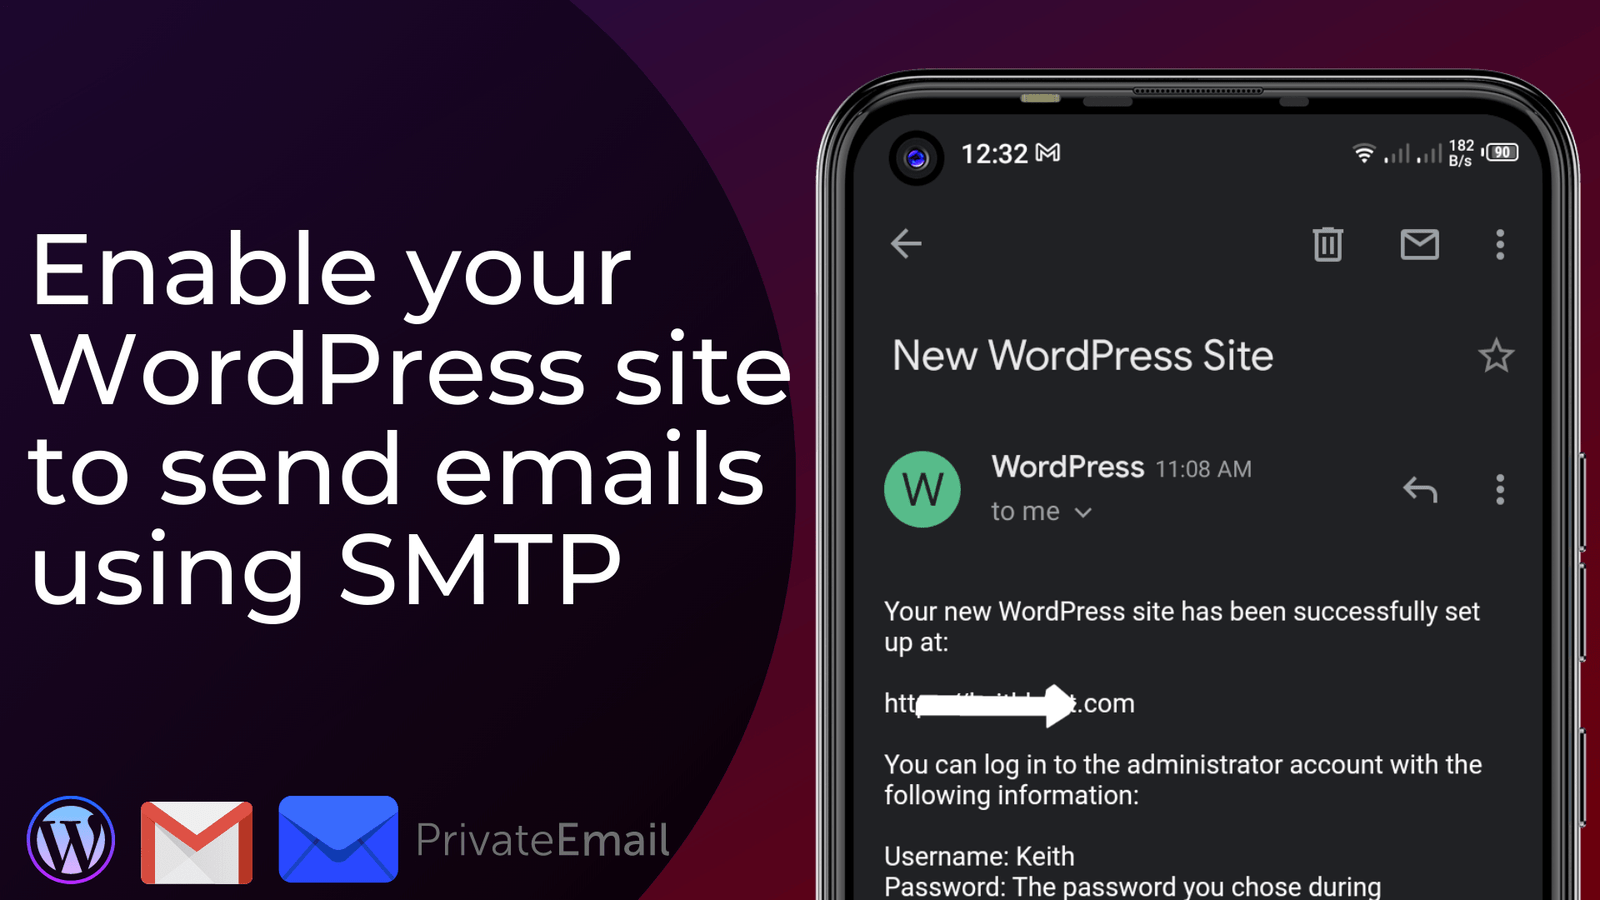 How to enable your WordPress site to send emails using SMTP for free